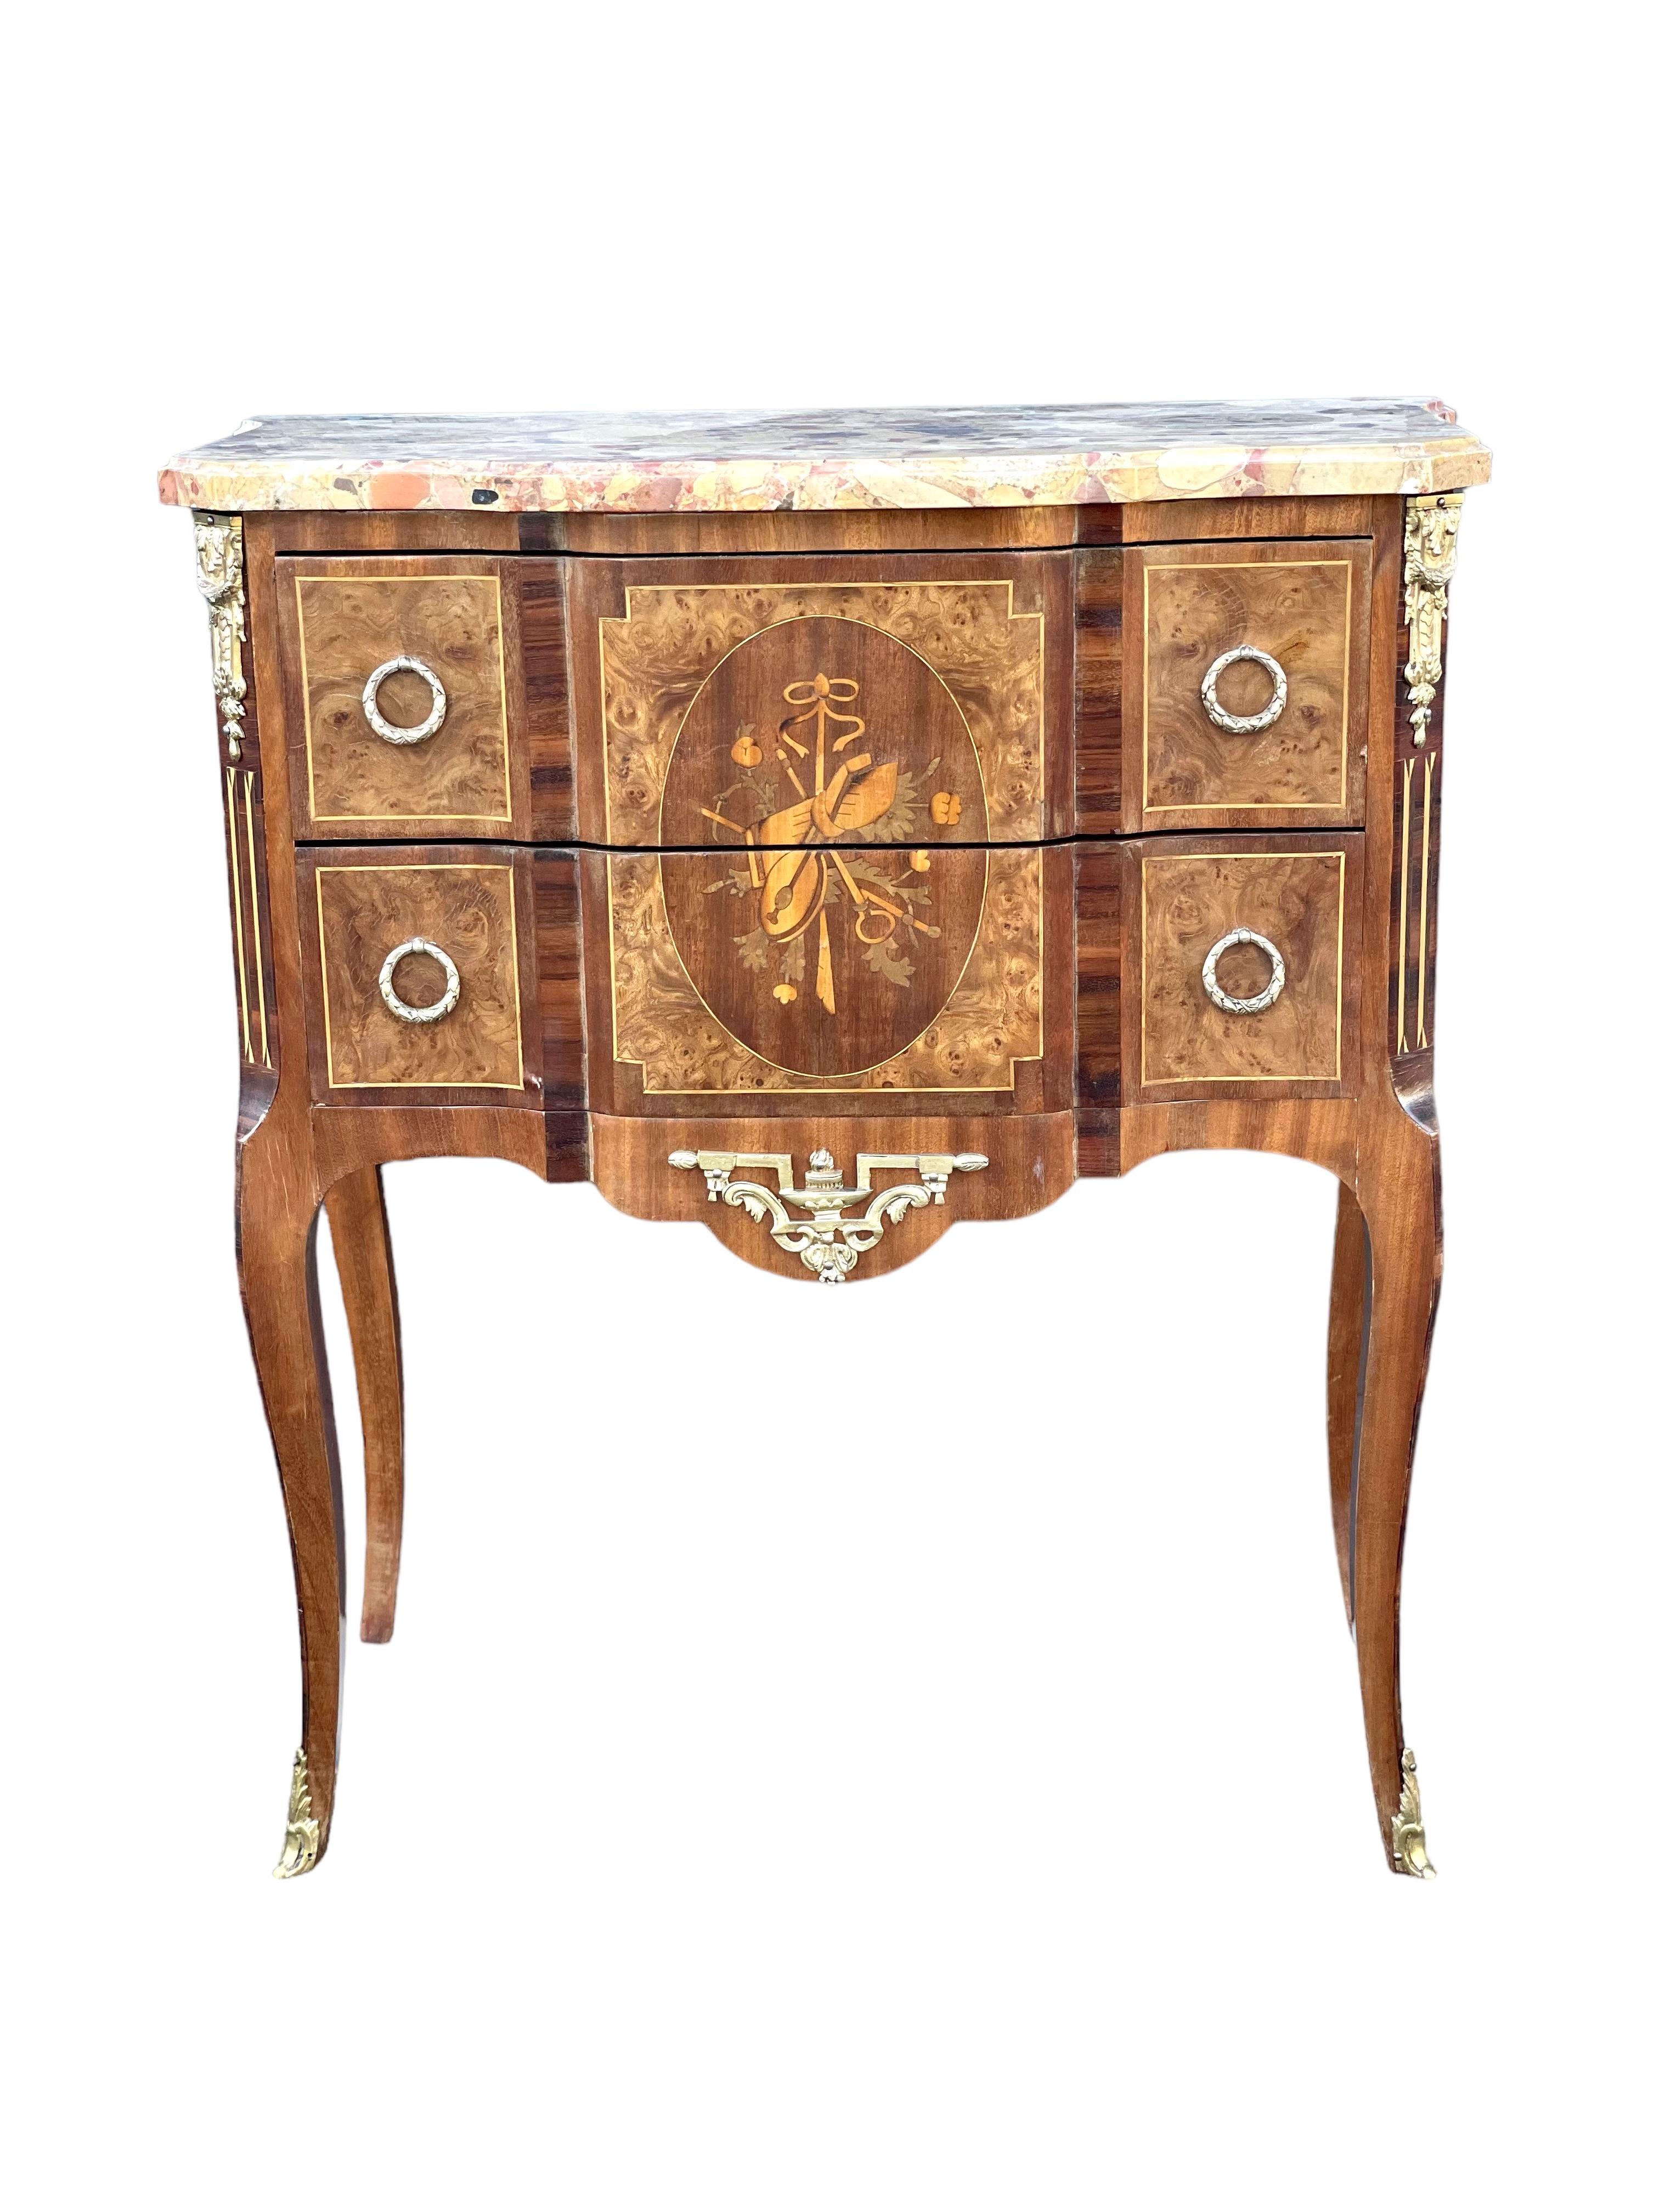 19th Century French Transitional Commodes with Marble Tops For Sale 13